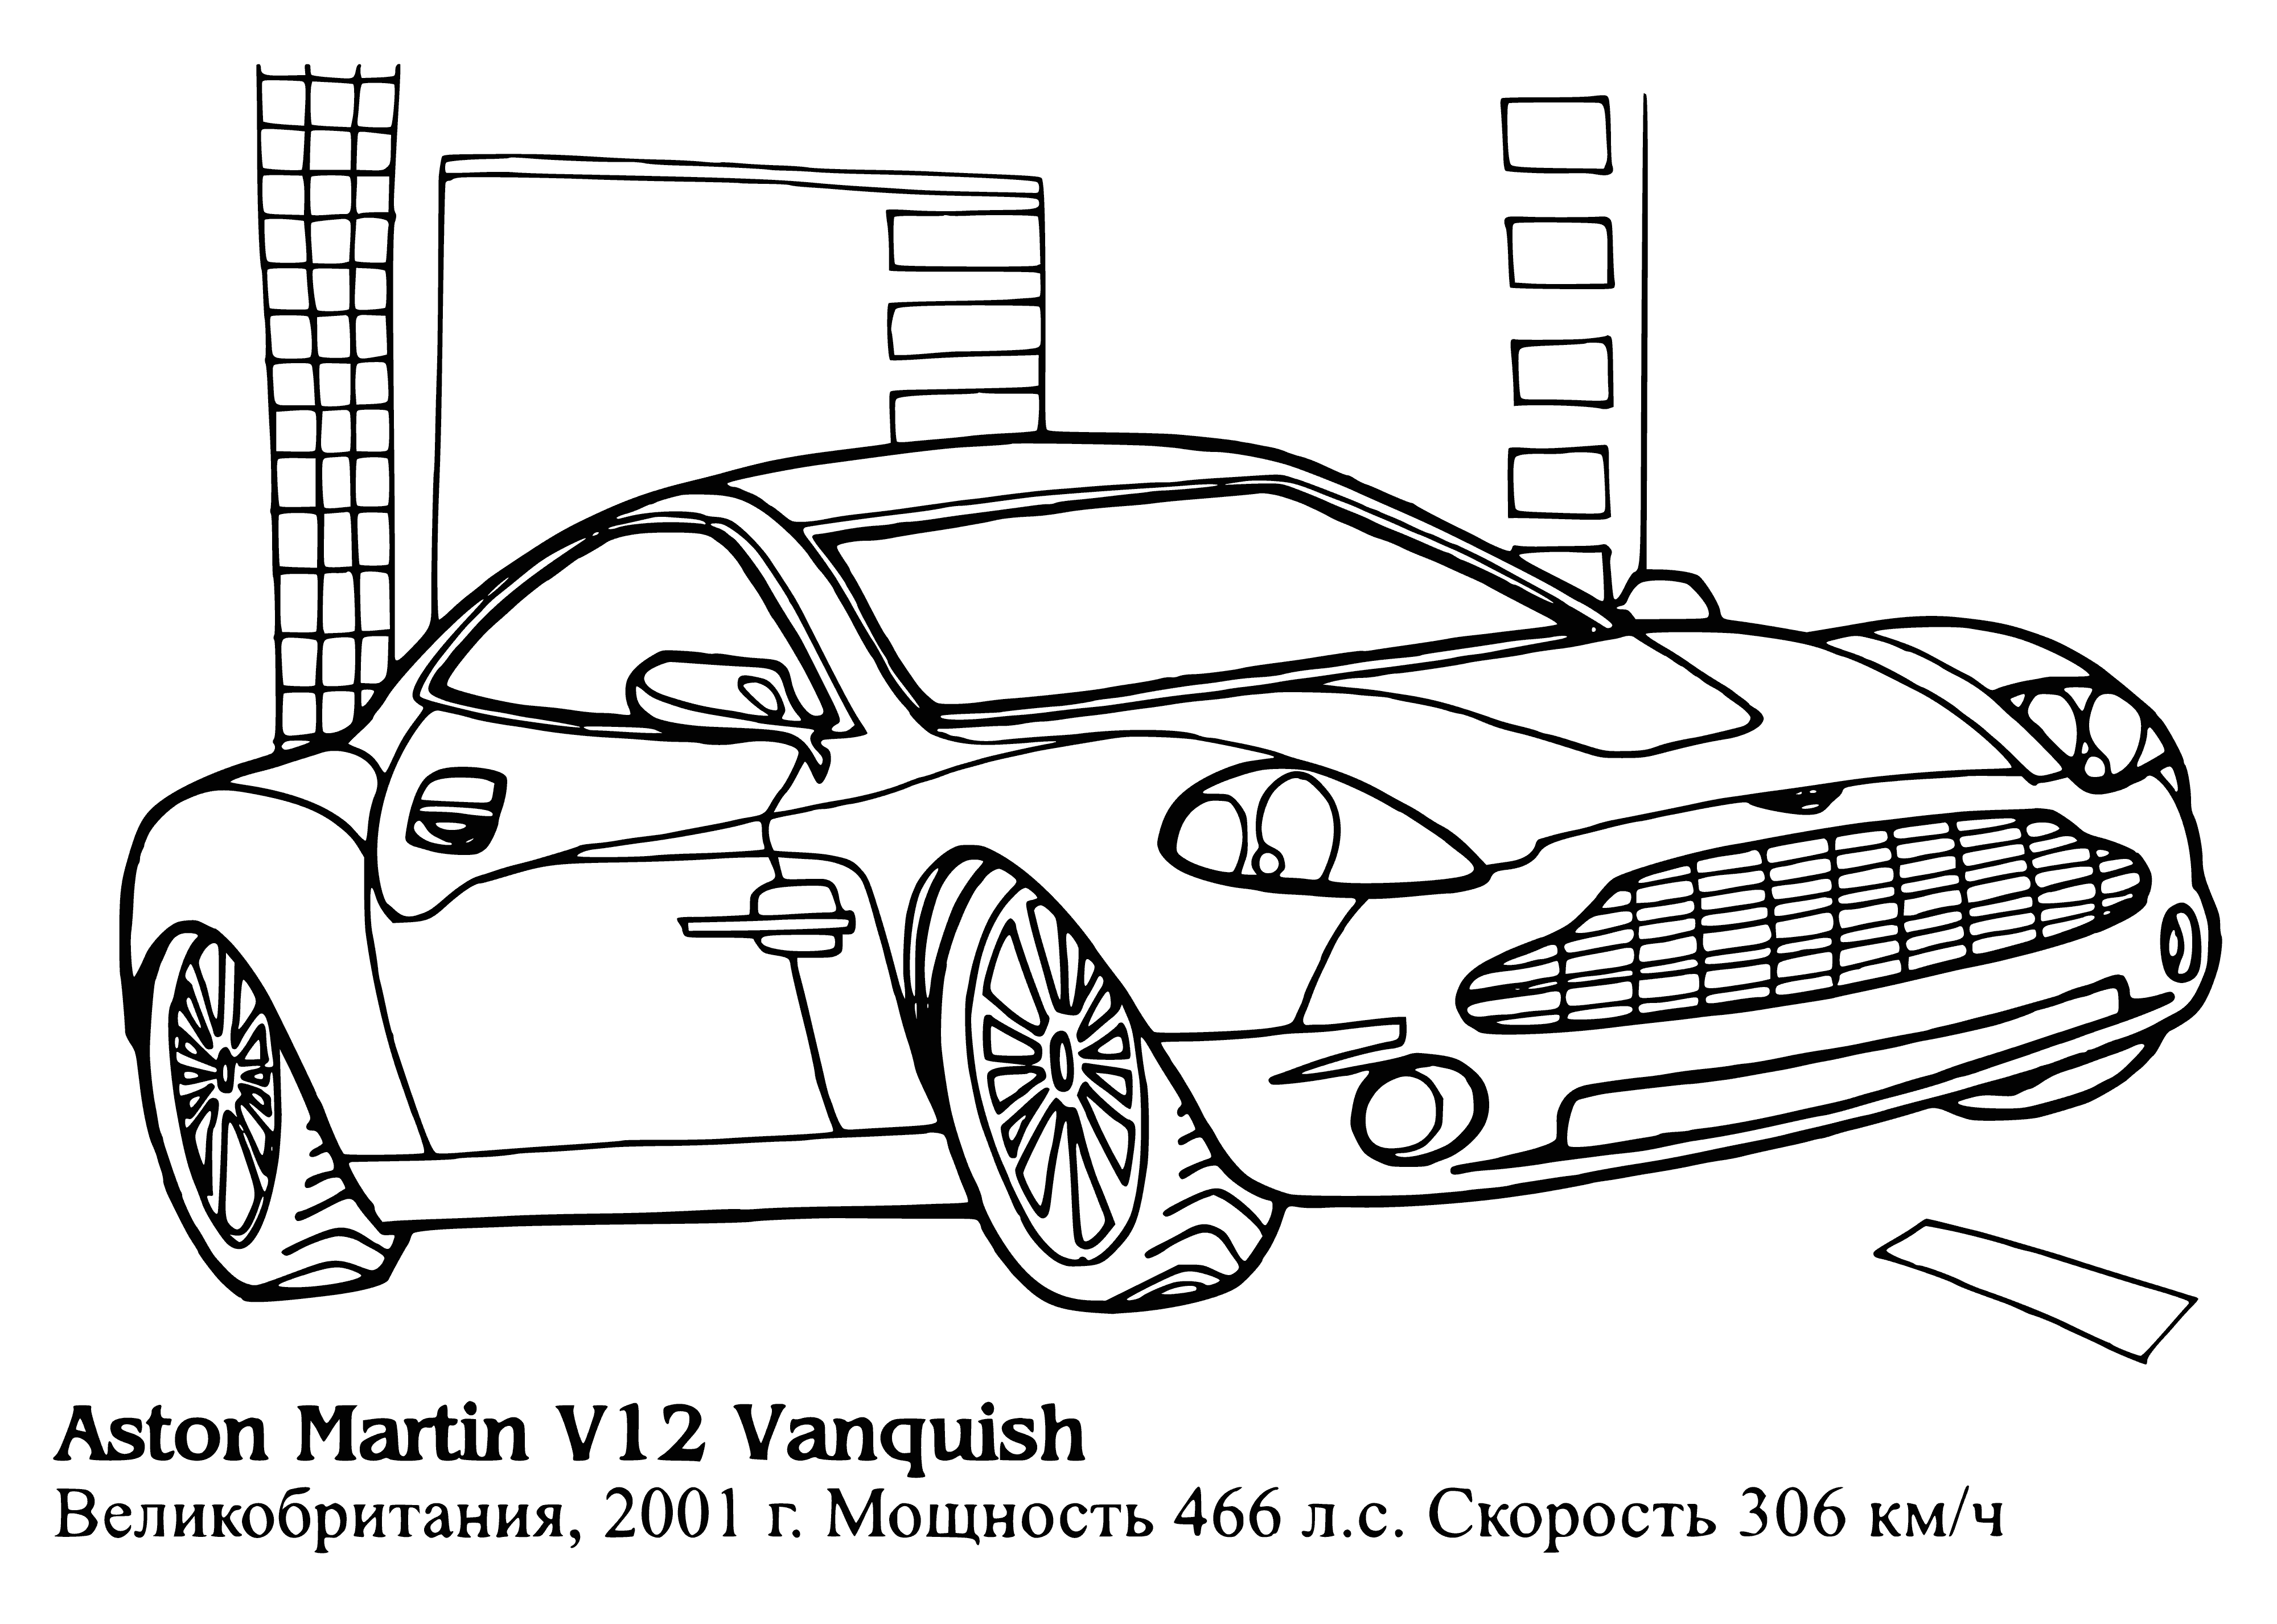 coloring page: Grand tourer: Aston Martin V12 Vanquish (2001-2005), two-door, two-seater, designed by Ian Callum; unveiled at 2001 Geneva Motor Show, replacing Virage.